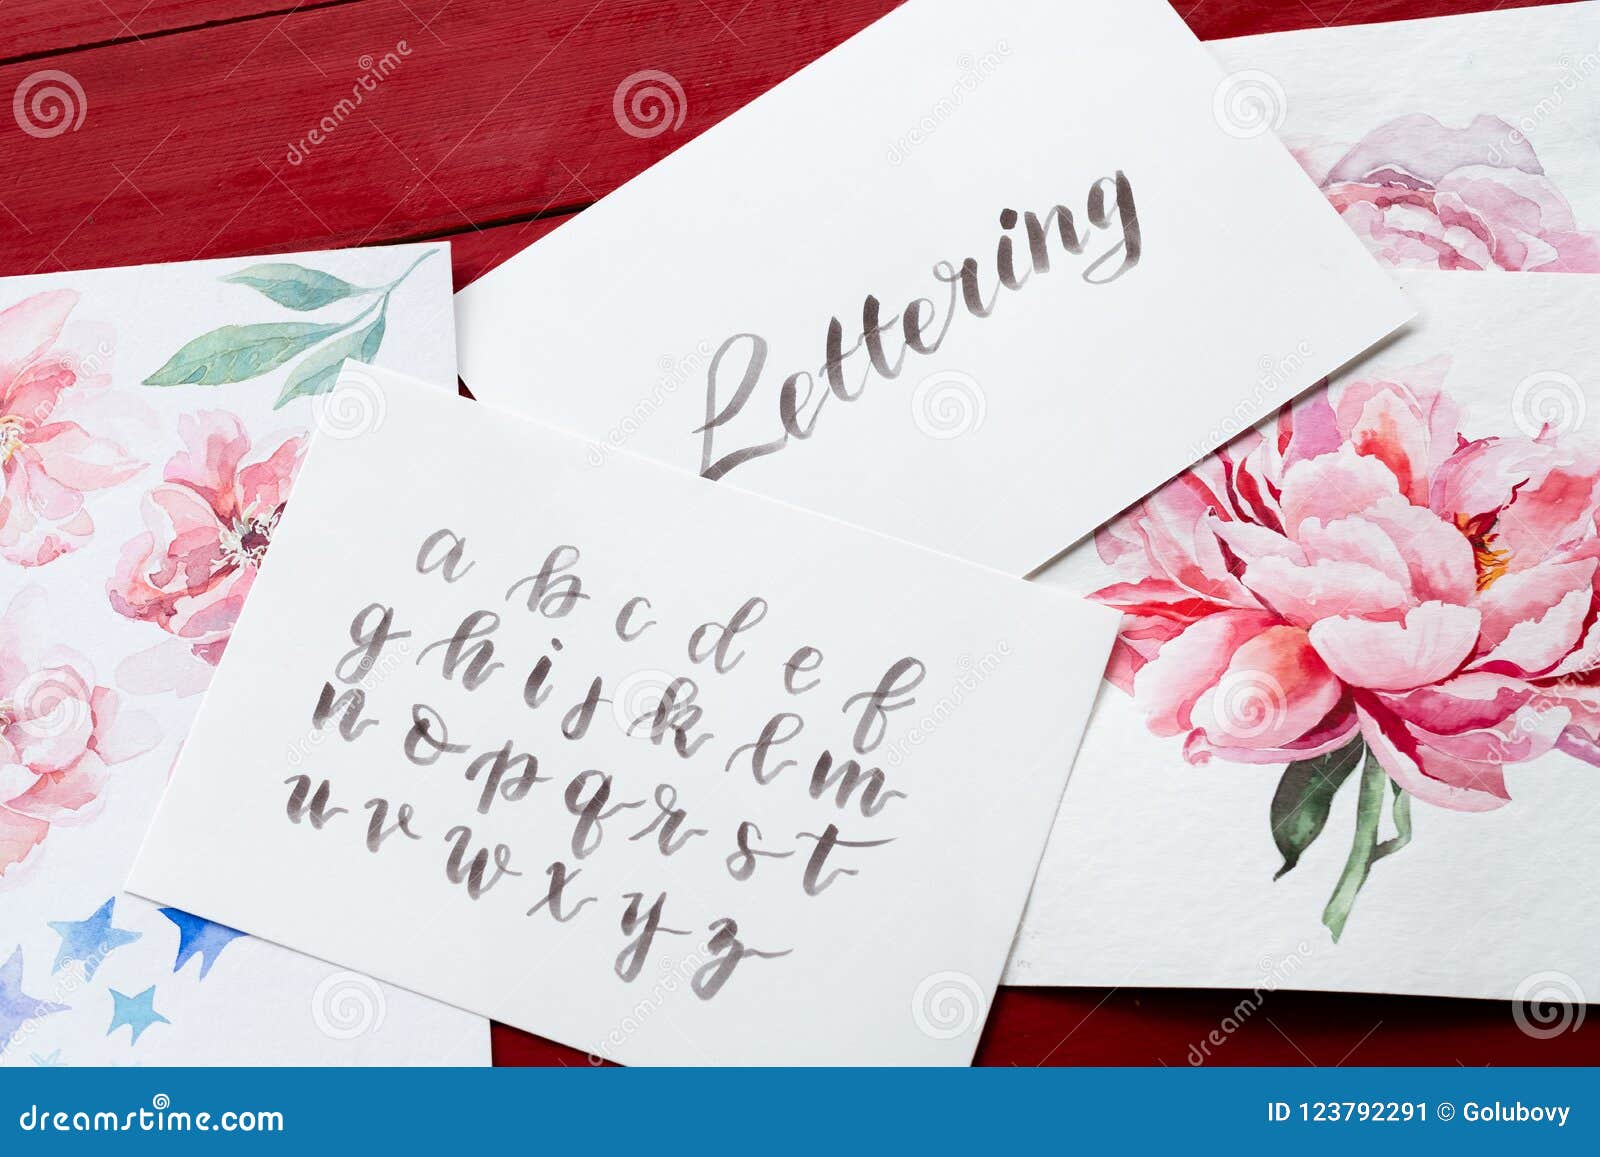 White Letter E on a Pink Background. Handwritten Script of the